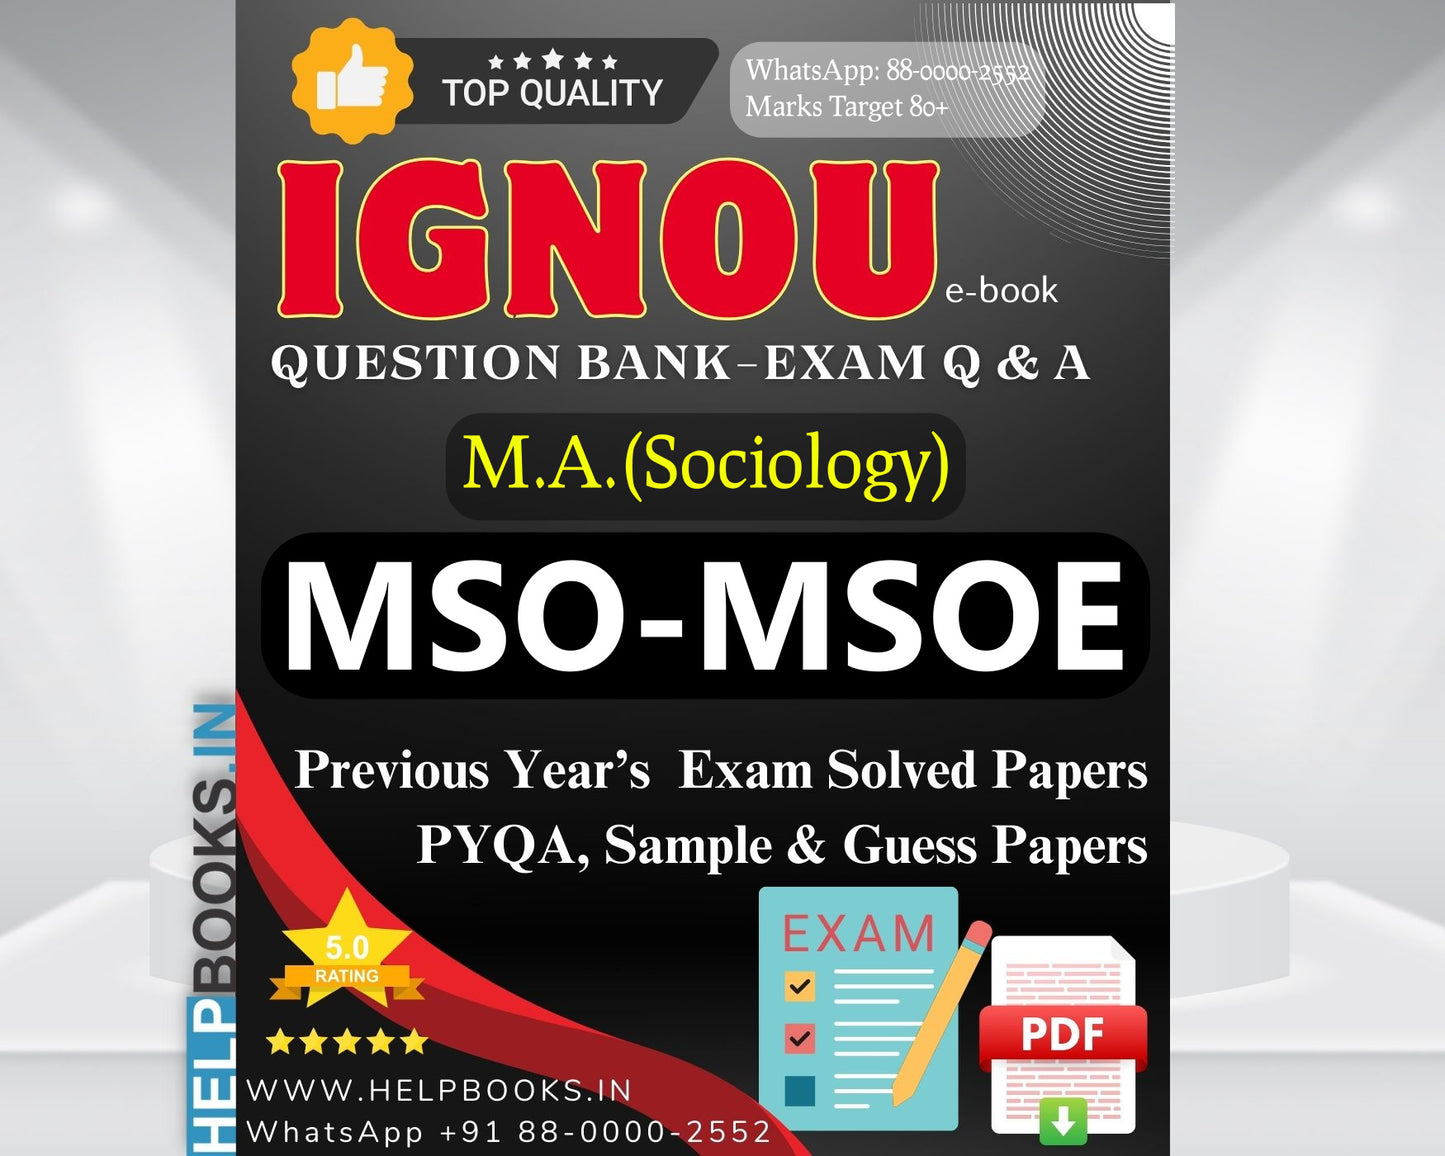 MSO IGNOU Exam Combo of 10 Solved Papers: 5 Previous Years' Solved Papers & 5 Sample Guess Papers for Master of Arts Sociology